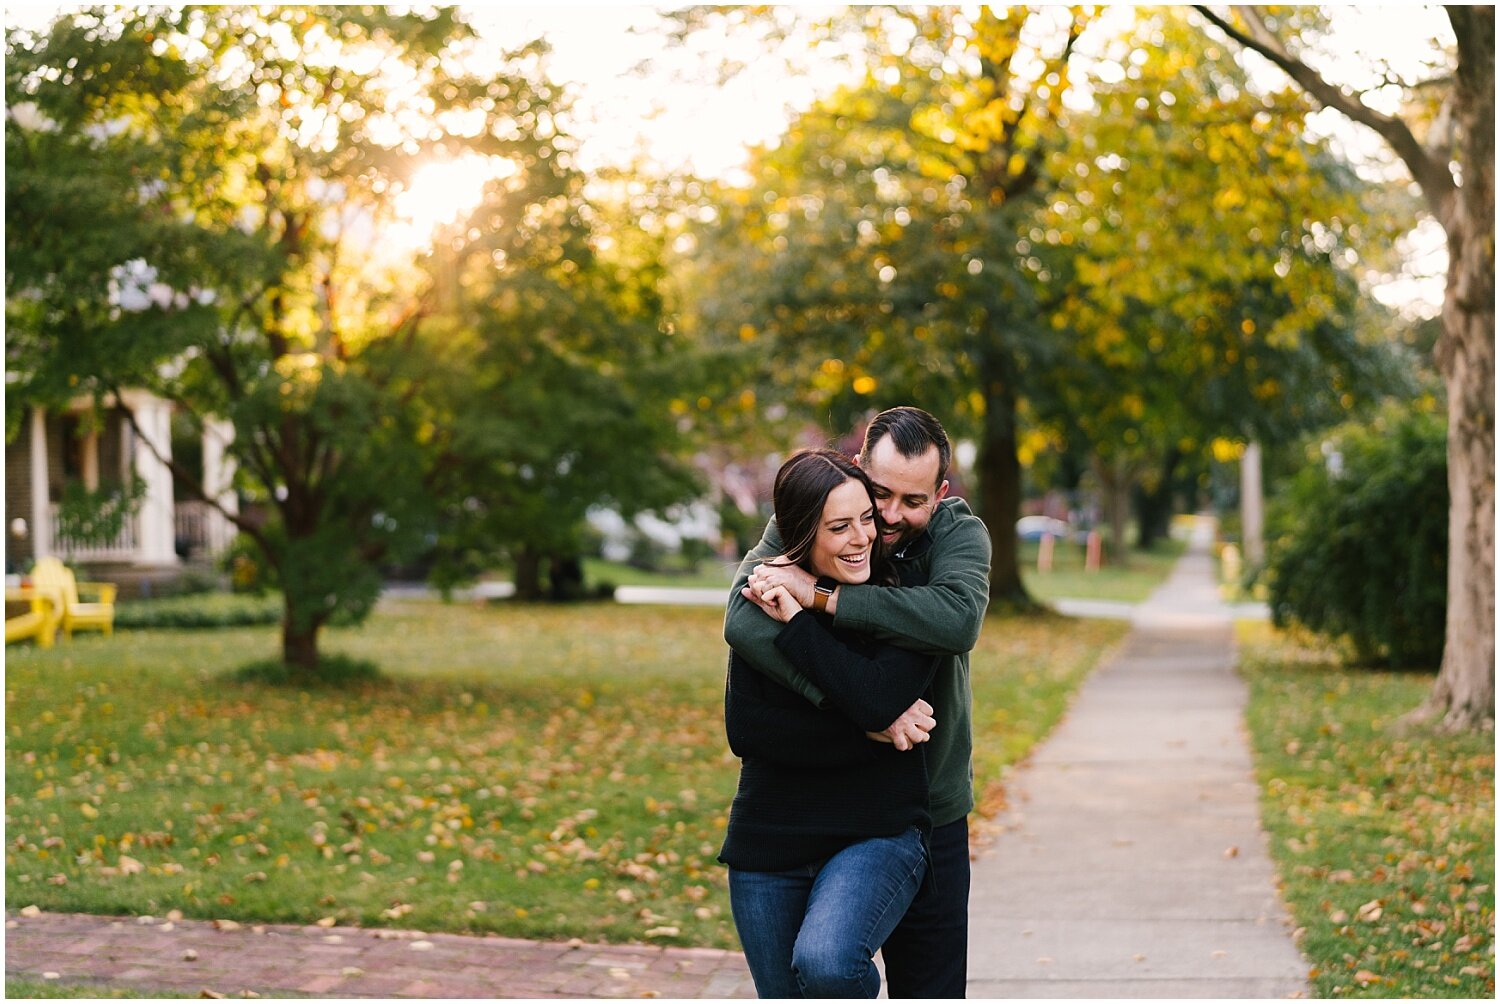 living+roots+wine+engagement+session+rochester+ny+wedding+photographer (24).jpg